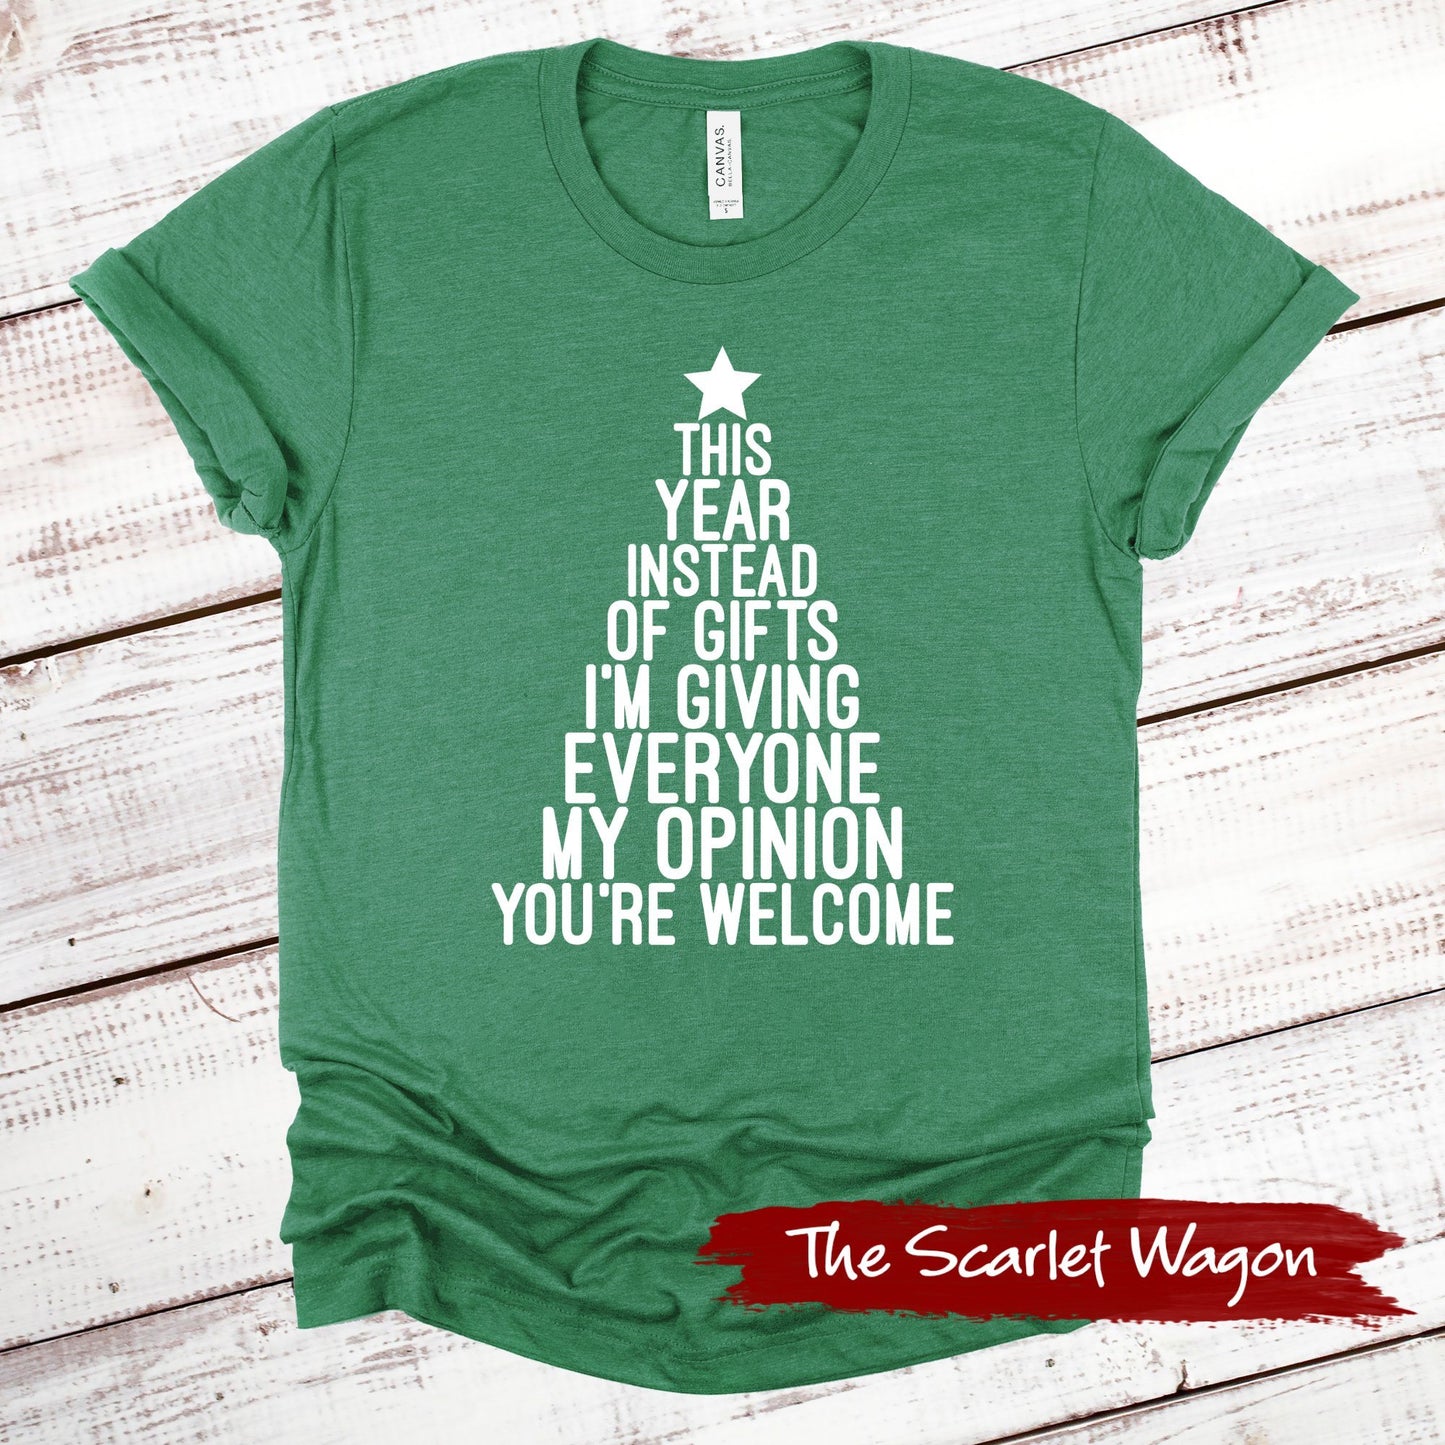 Instead of Gifts I'm Giving My Opinion Christmas Shirt Scarlet Wagon Heather Green XS 